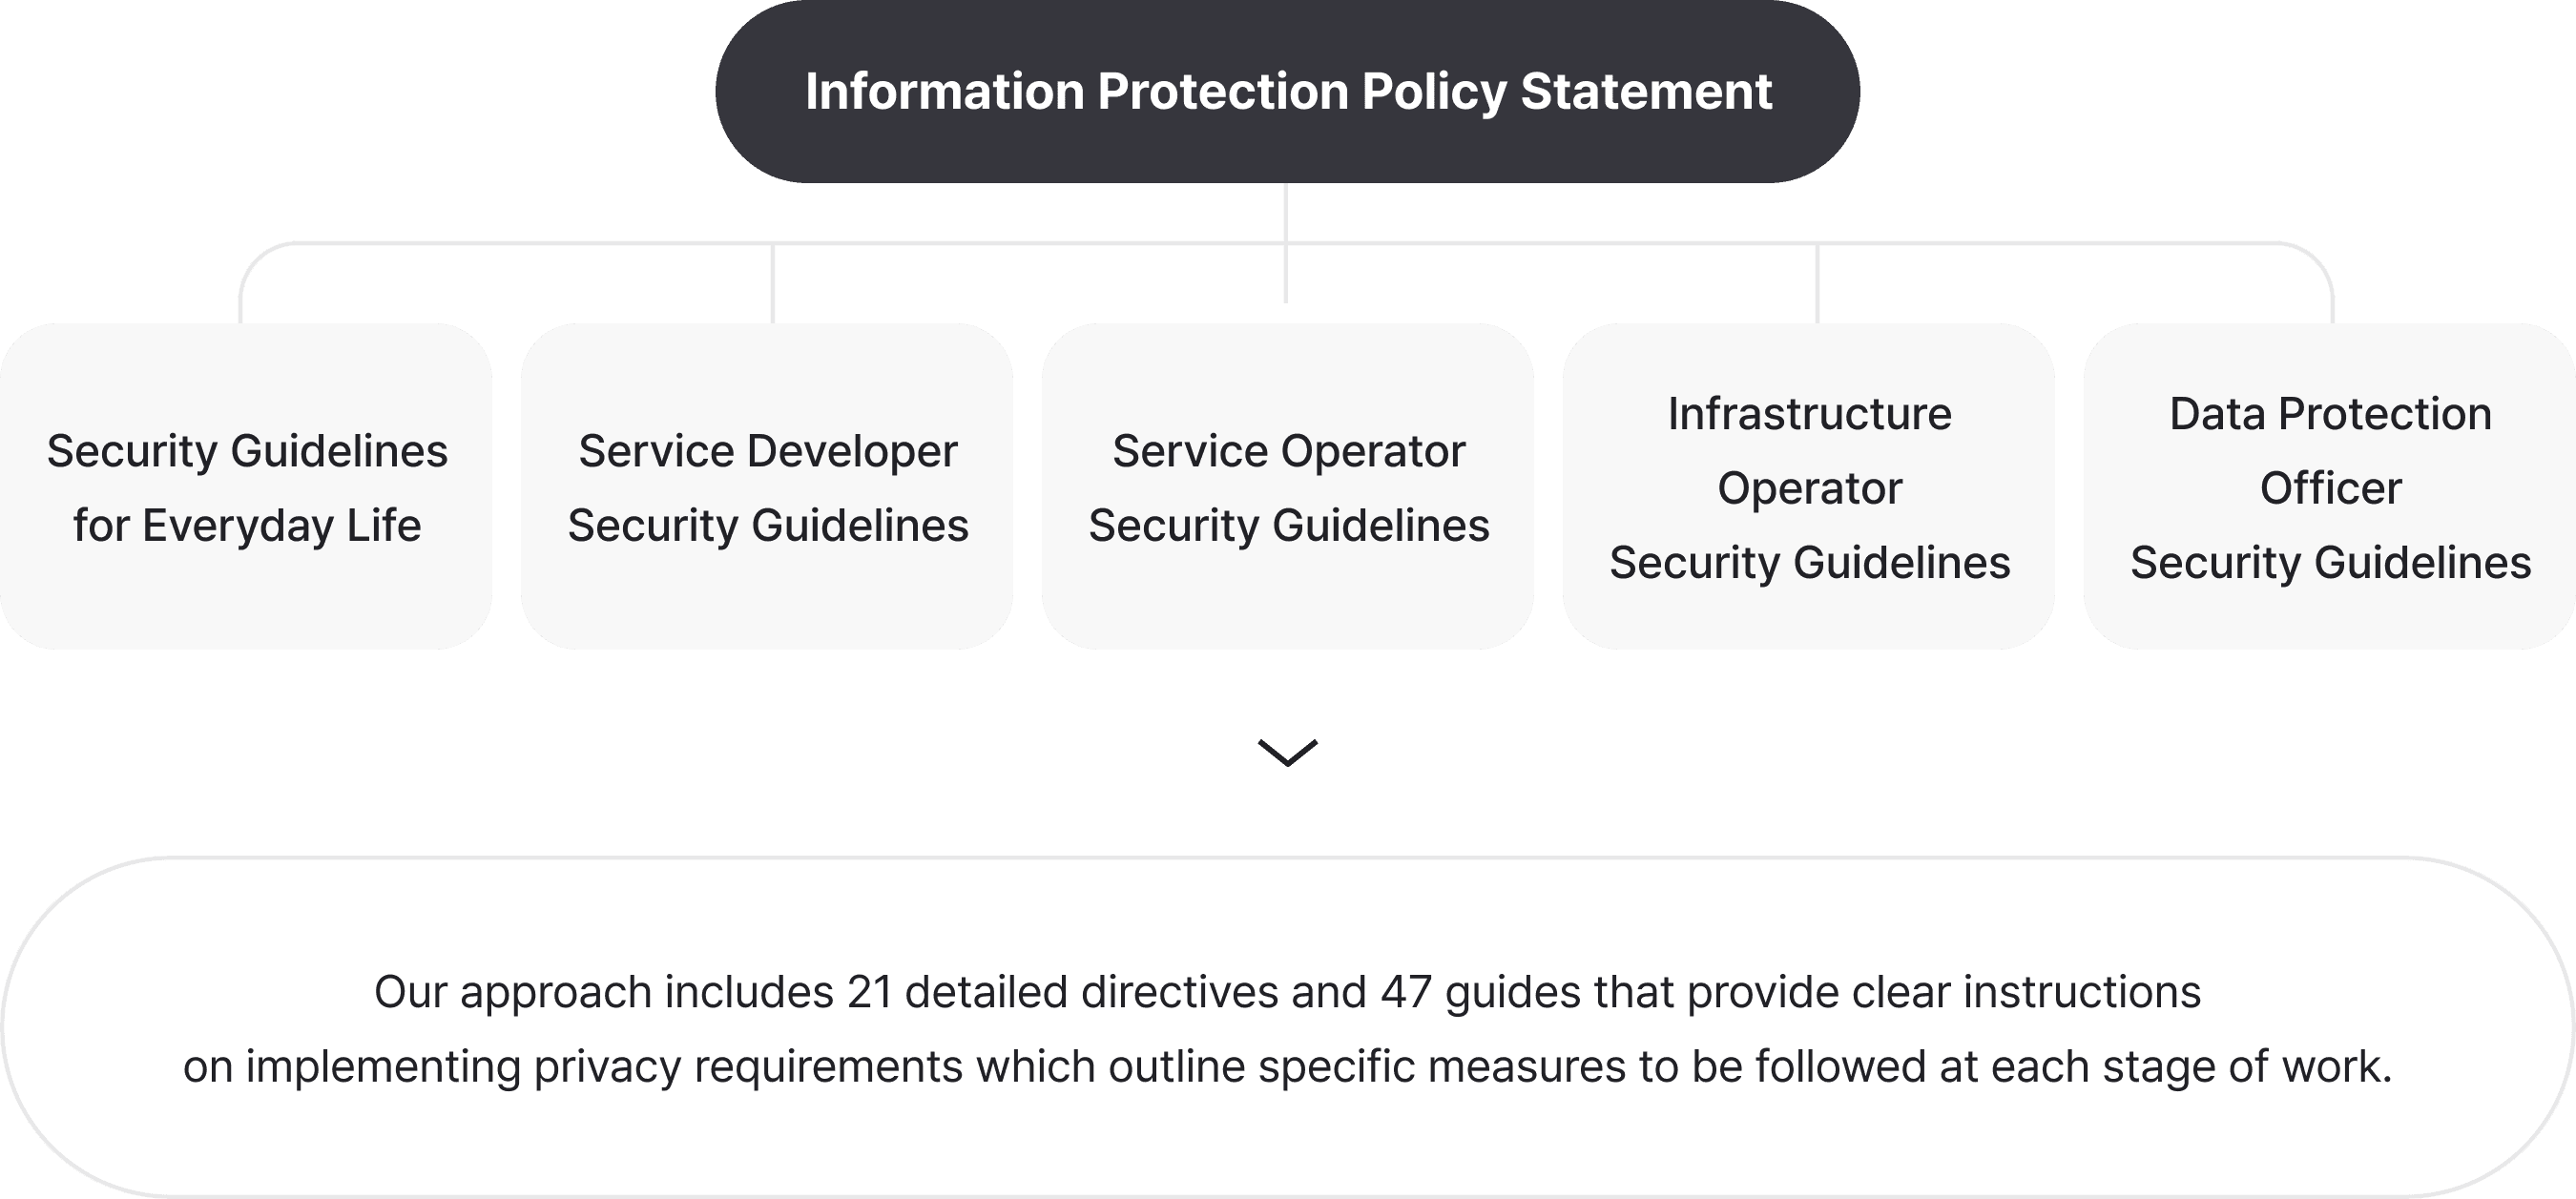 Information Protection Policy Statement